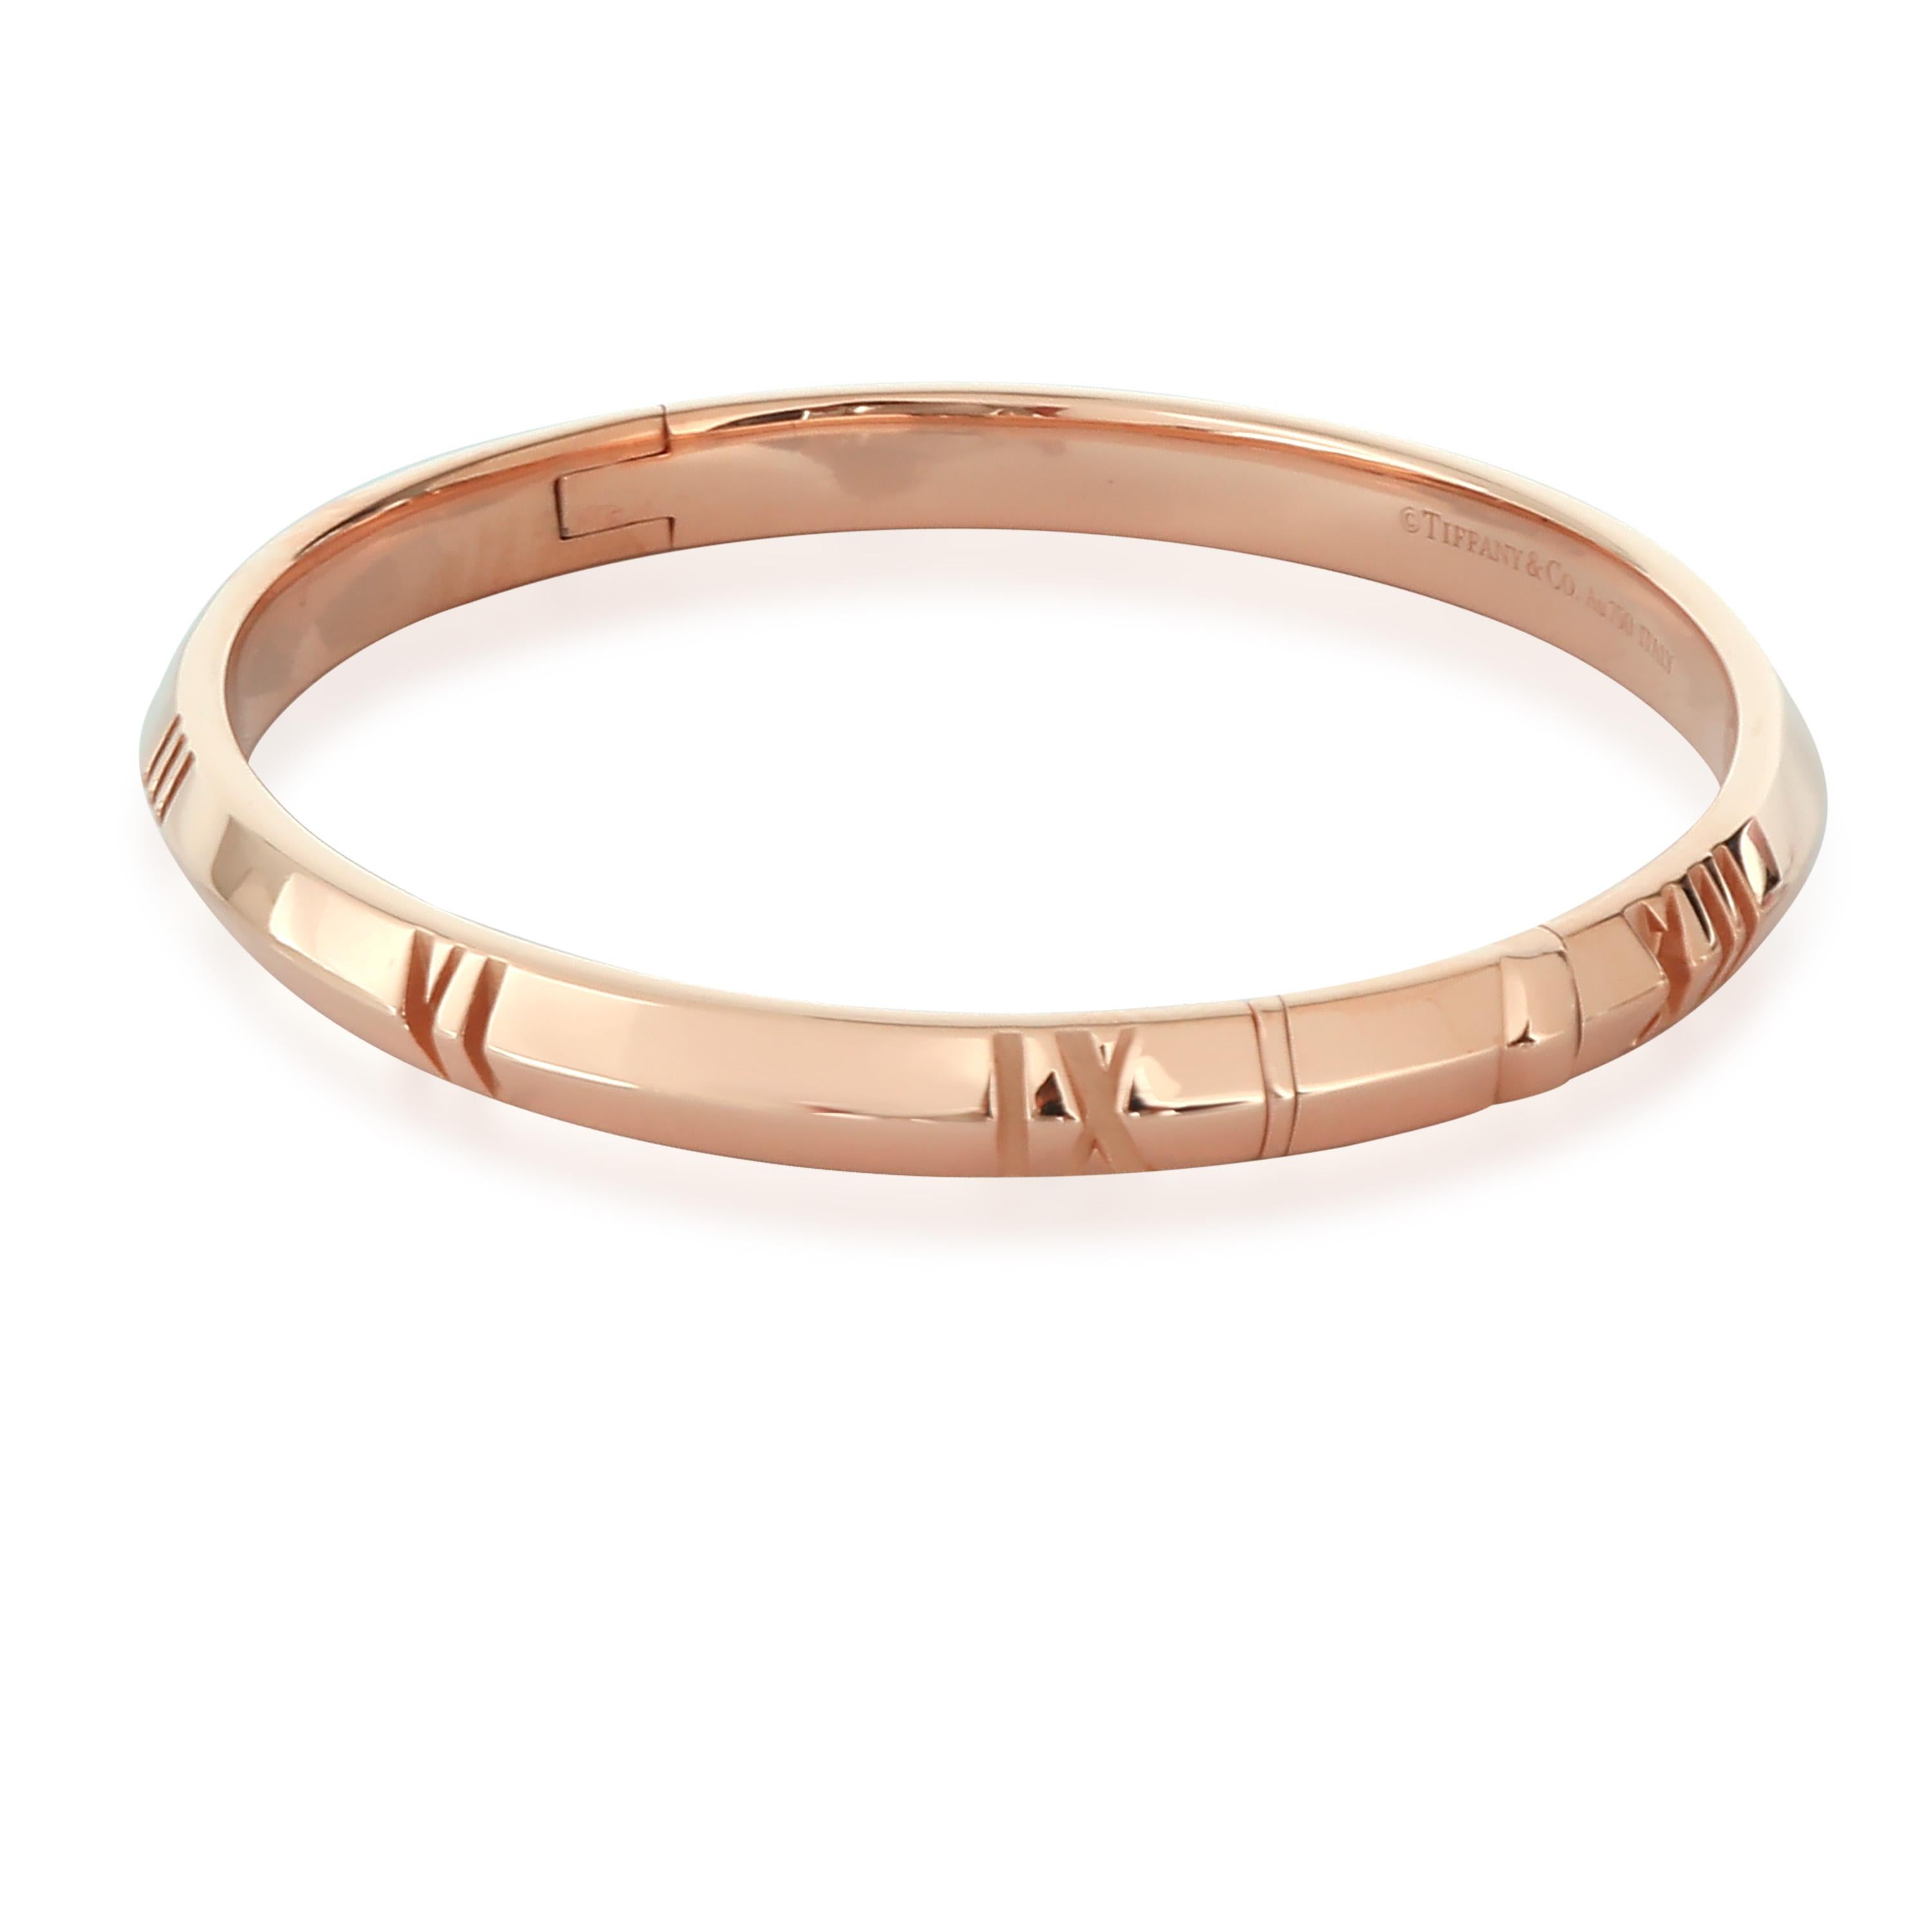 Tiffany & Co. Atlas Bracelet in 18k Rose Gold In Excellent Condition For Sale In New York, NY